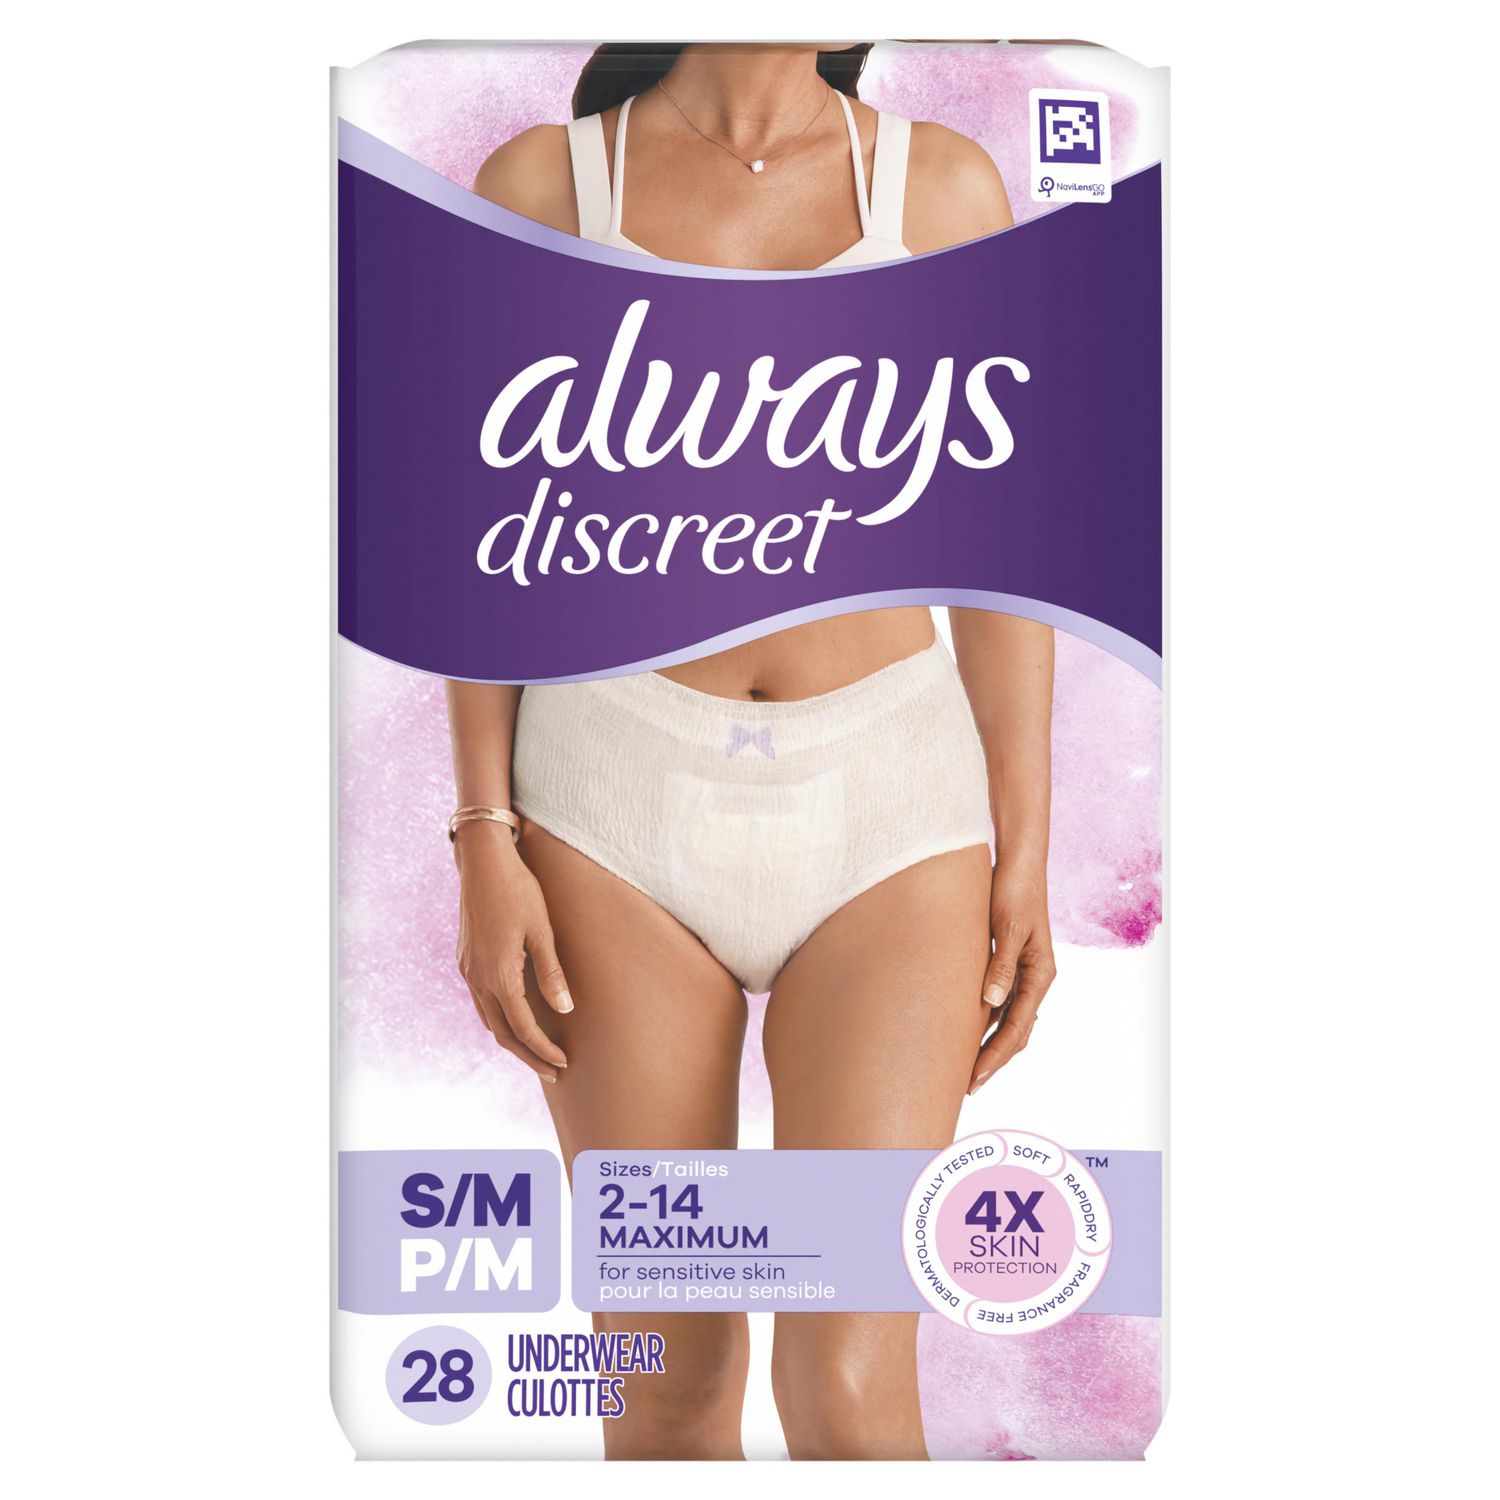 Always Discreet Max Protection Underwear, S/M - 19 Count